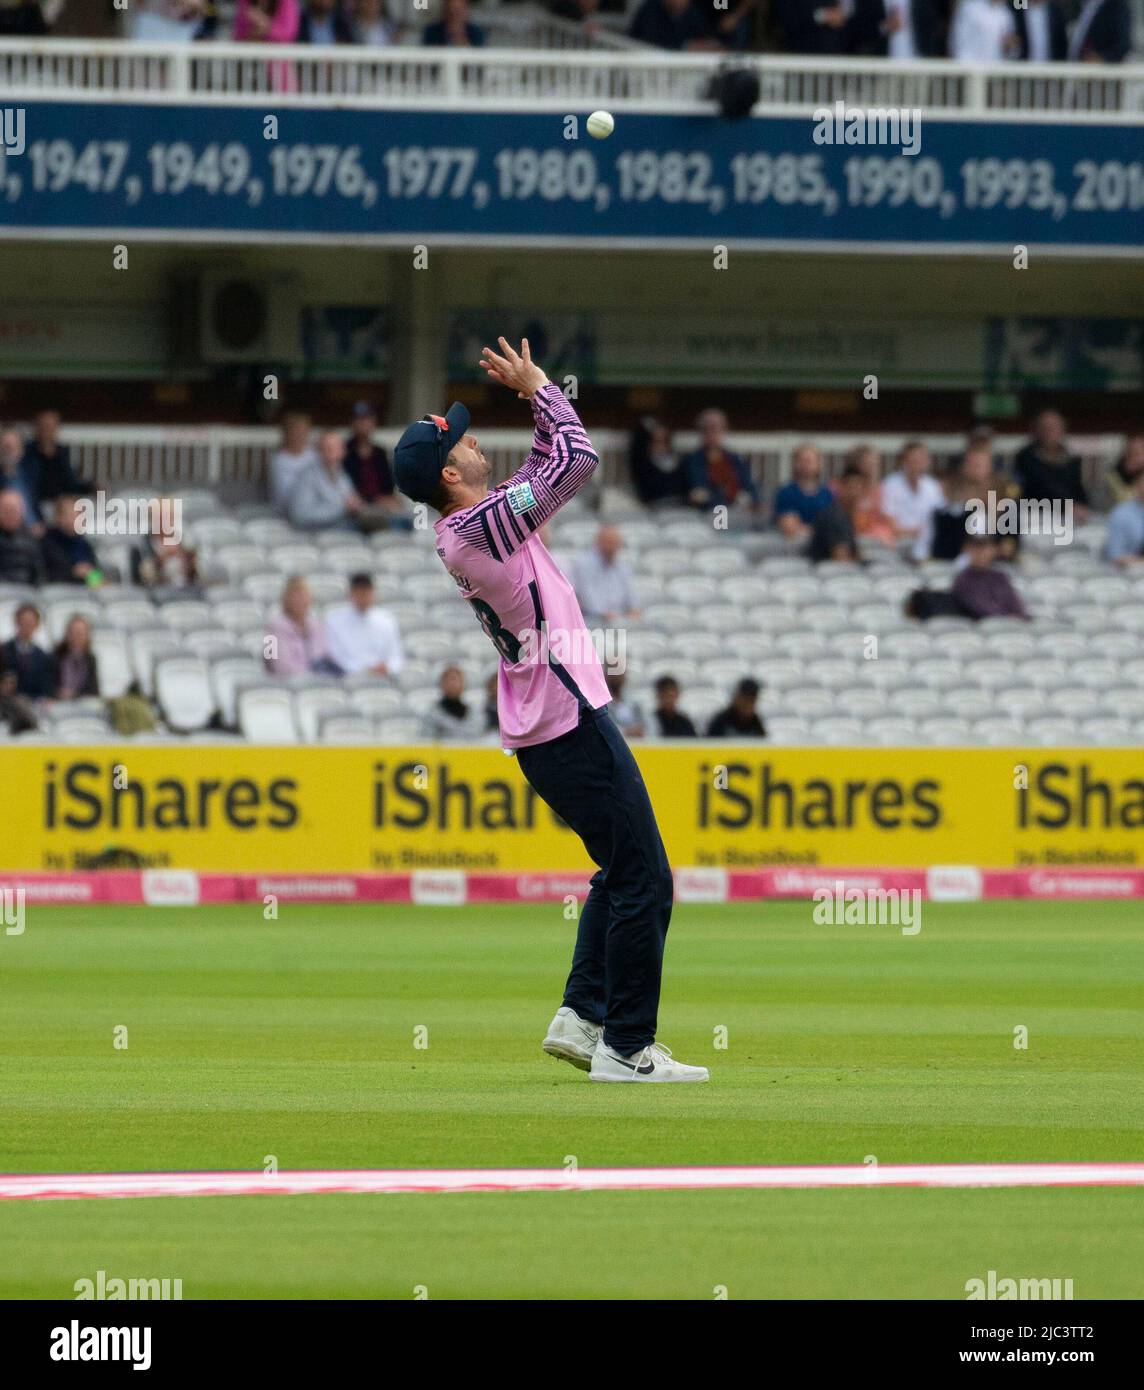 Steven Eskinazi, Middlesex Captain takes the Catch of Surrey Opener Will Jacks In a T20 Blast Match on the 9th of June 2022 Stock Photo